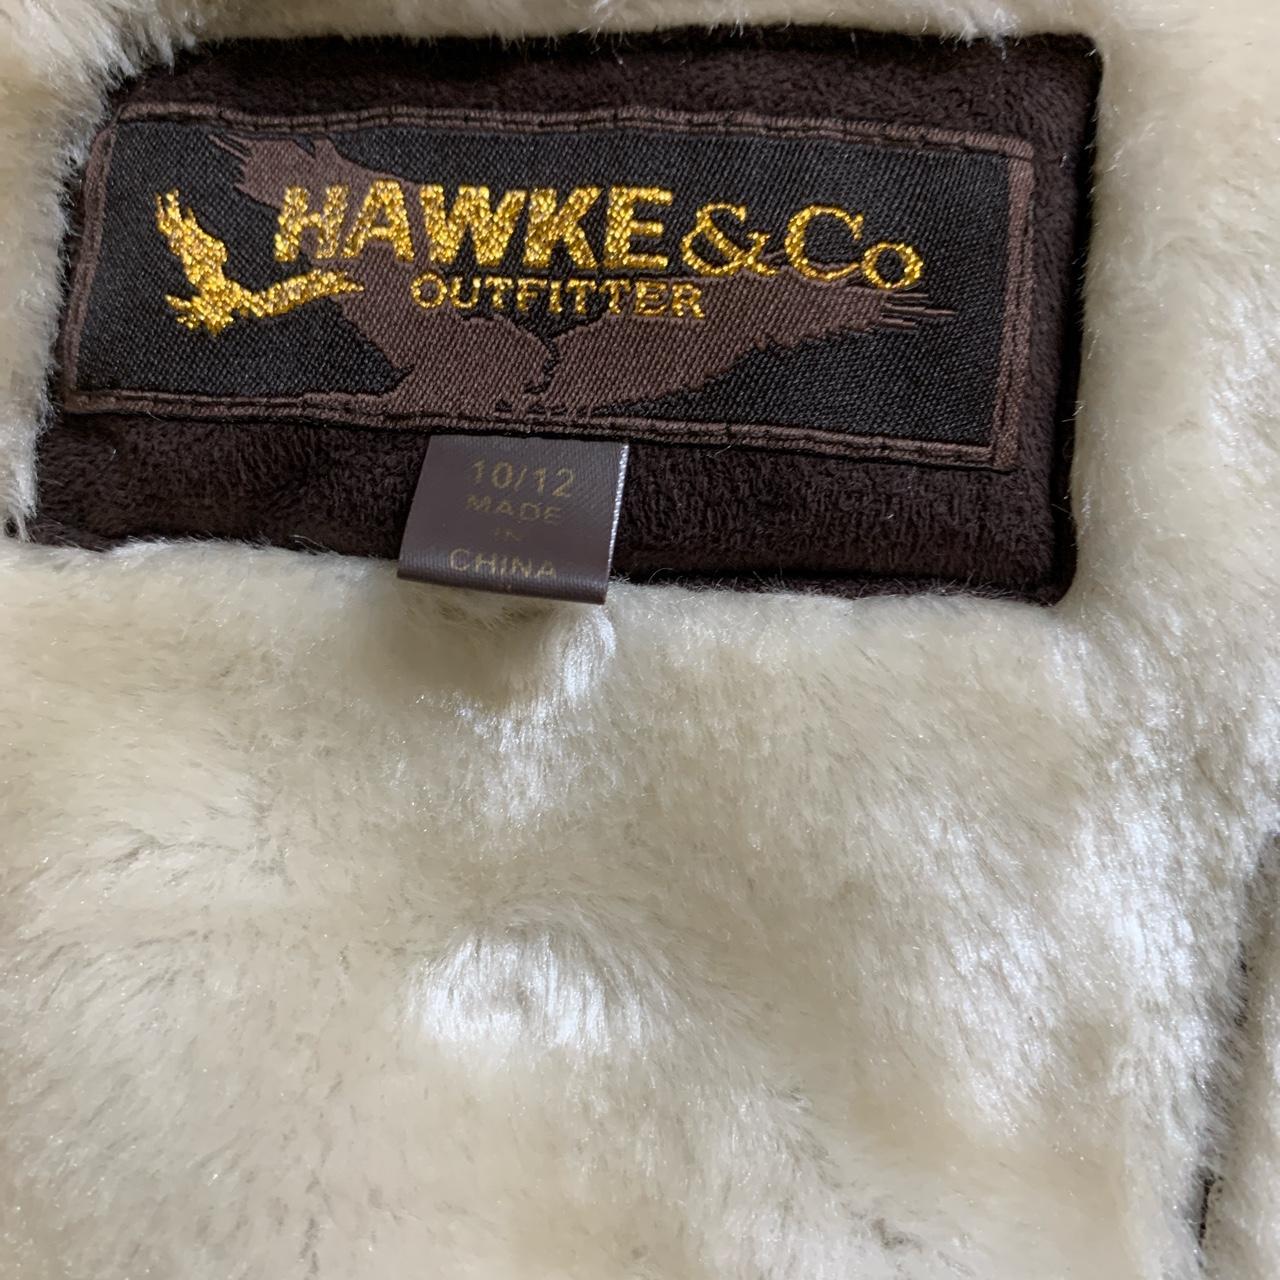 Hawke & Co. Women's Brown and Cream Jacket (3)